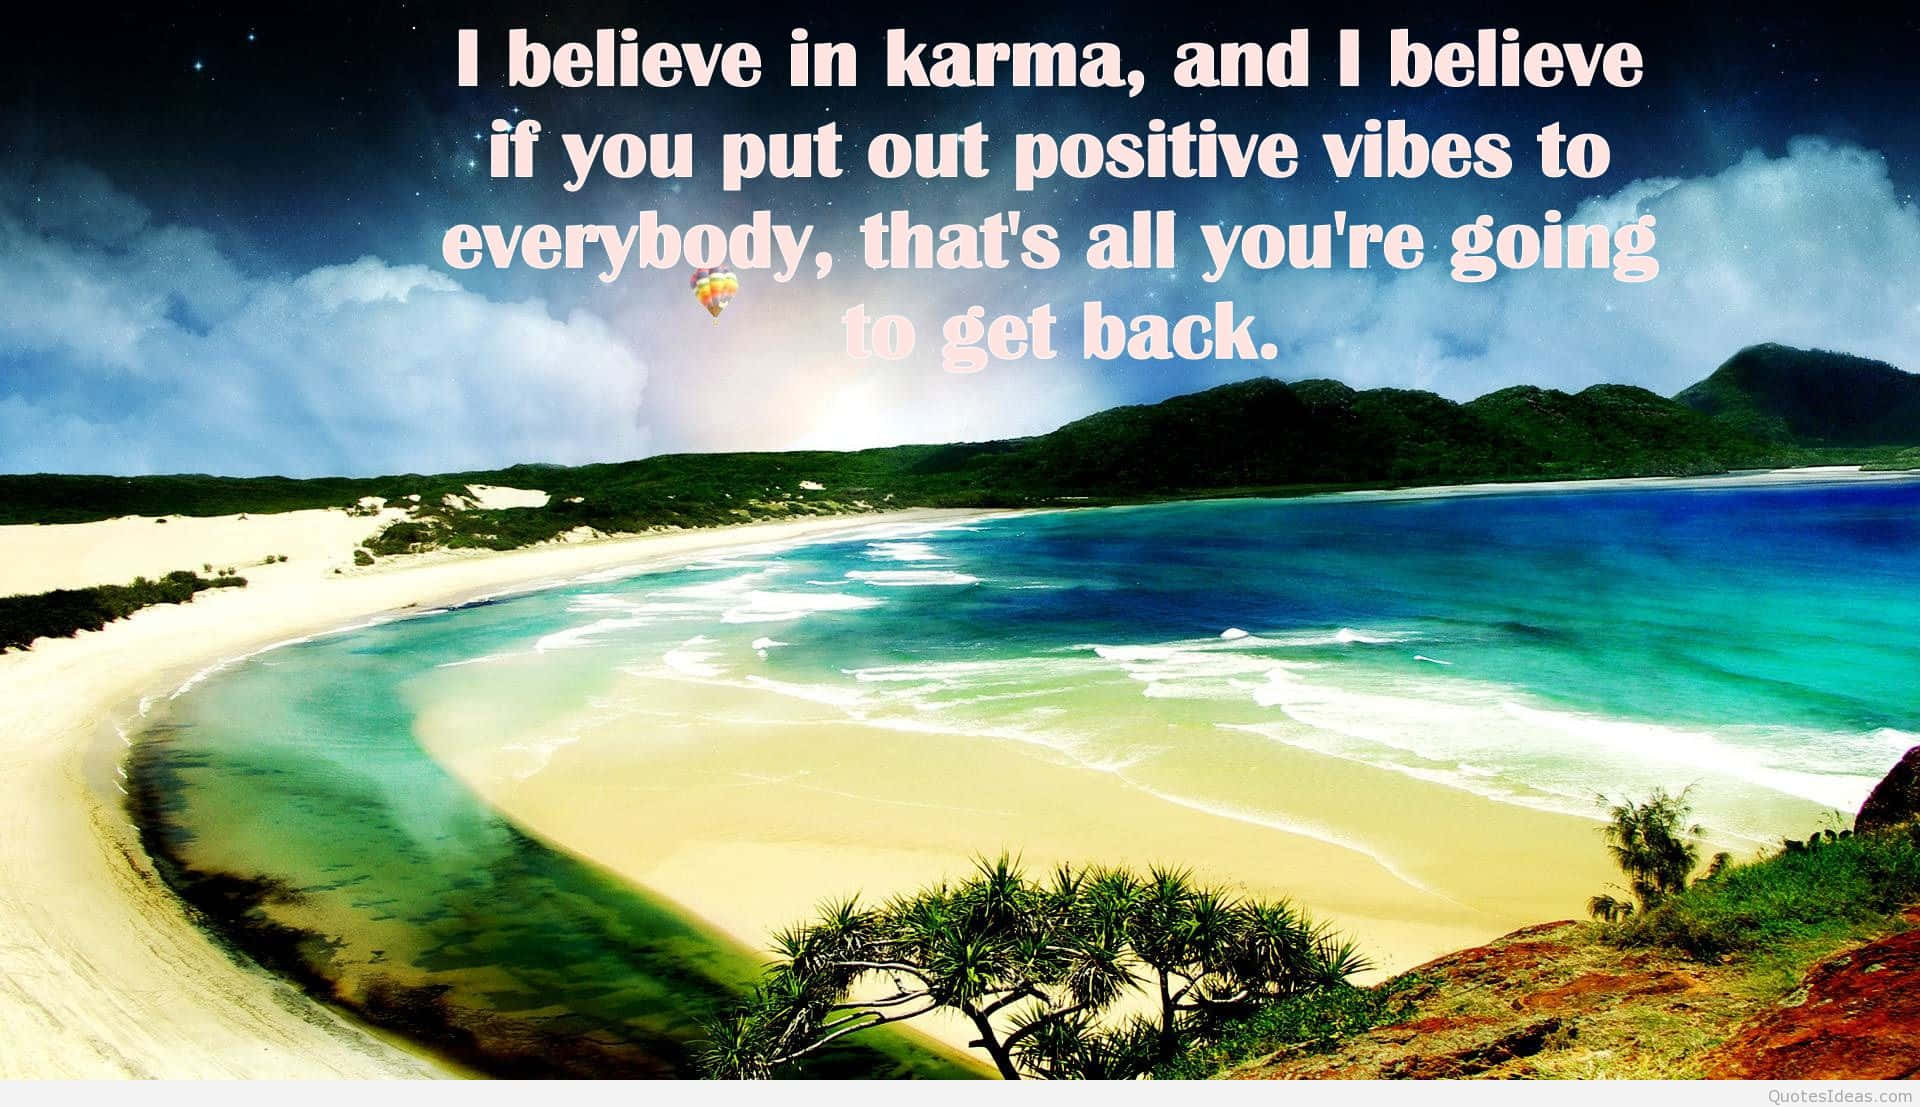 A Beach With A Quote That Says Believe In Karma And Believe You Put Out Positive Vibes Everybody'll Get Back